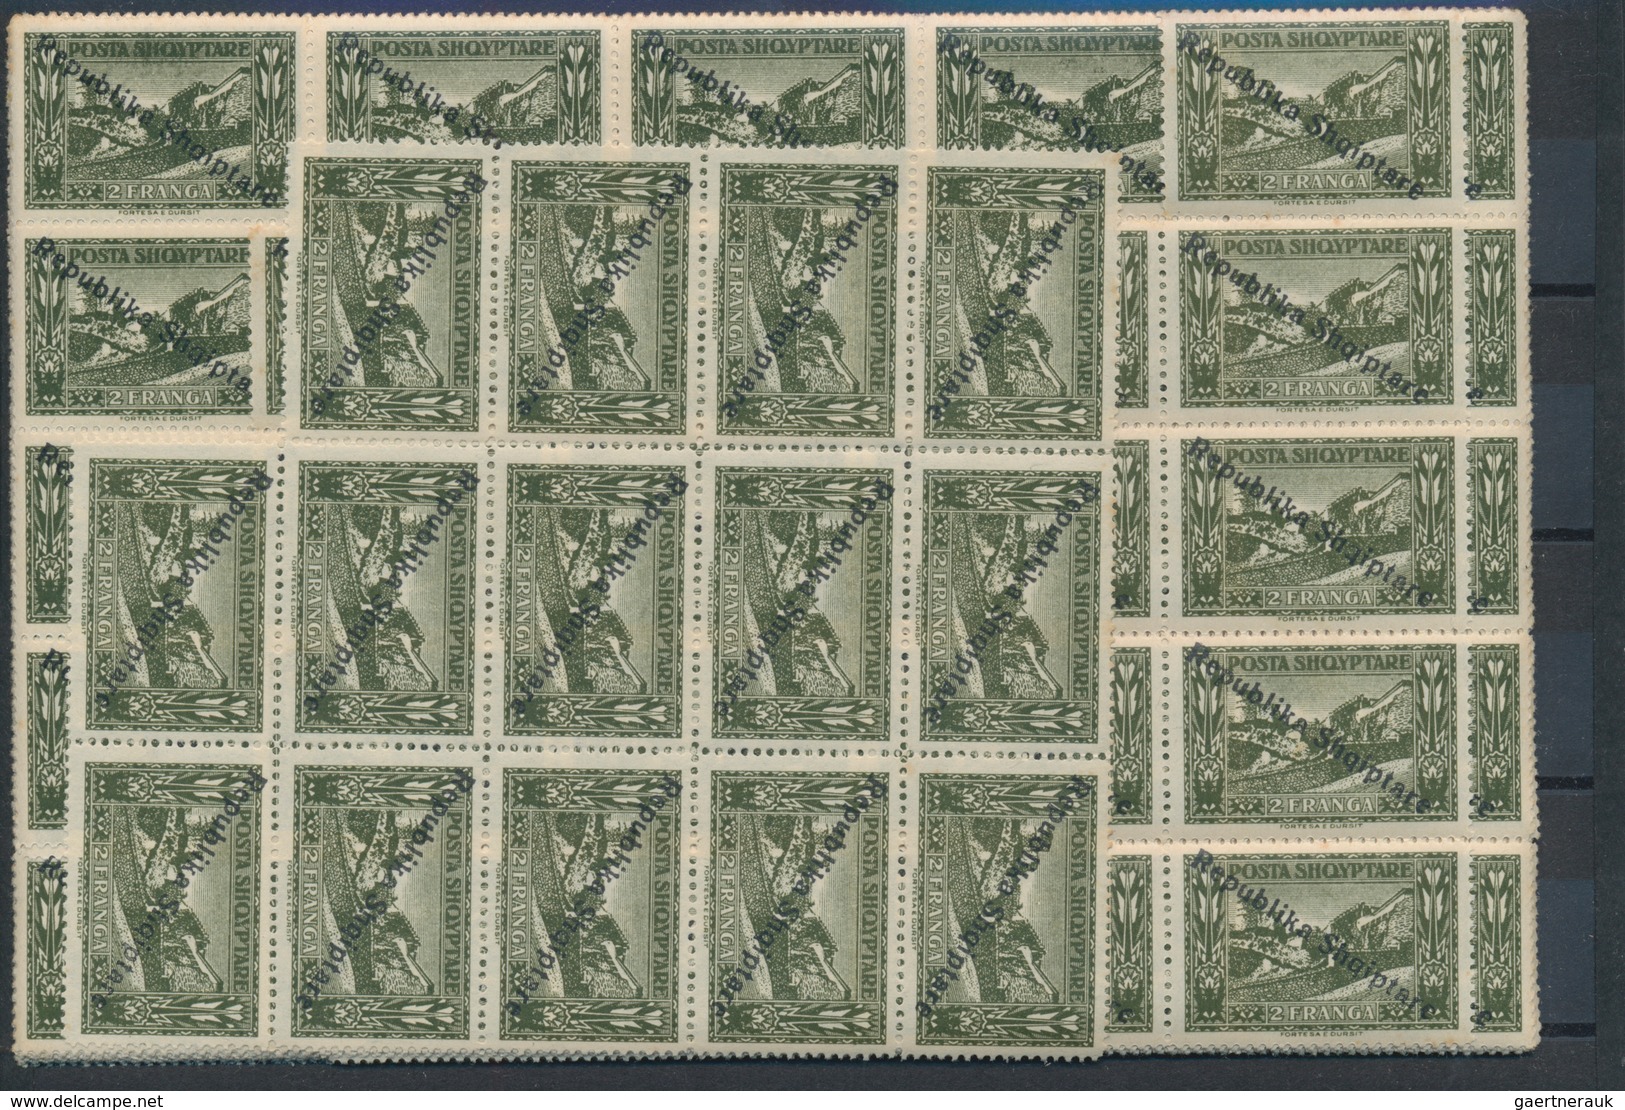 Albanien: 1920/1928, stock only MNH issues in units offering these quantities: Michel no. 74 (150 co